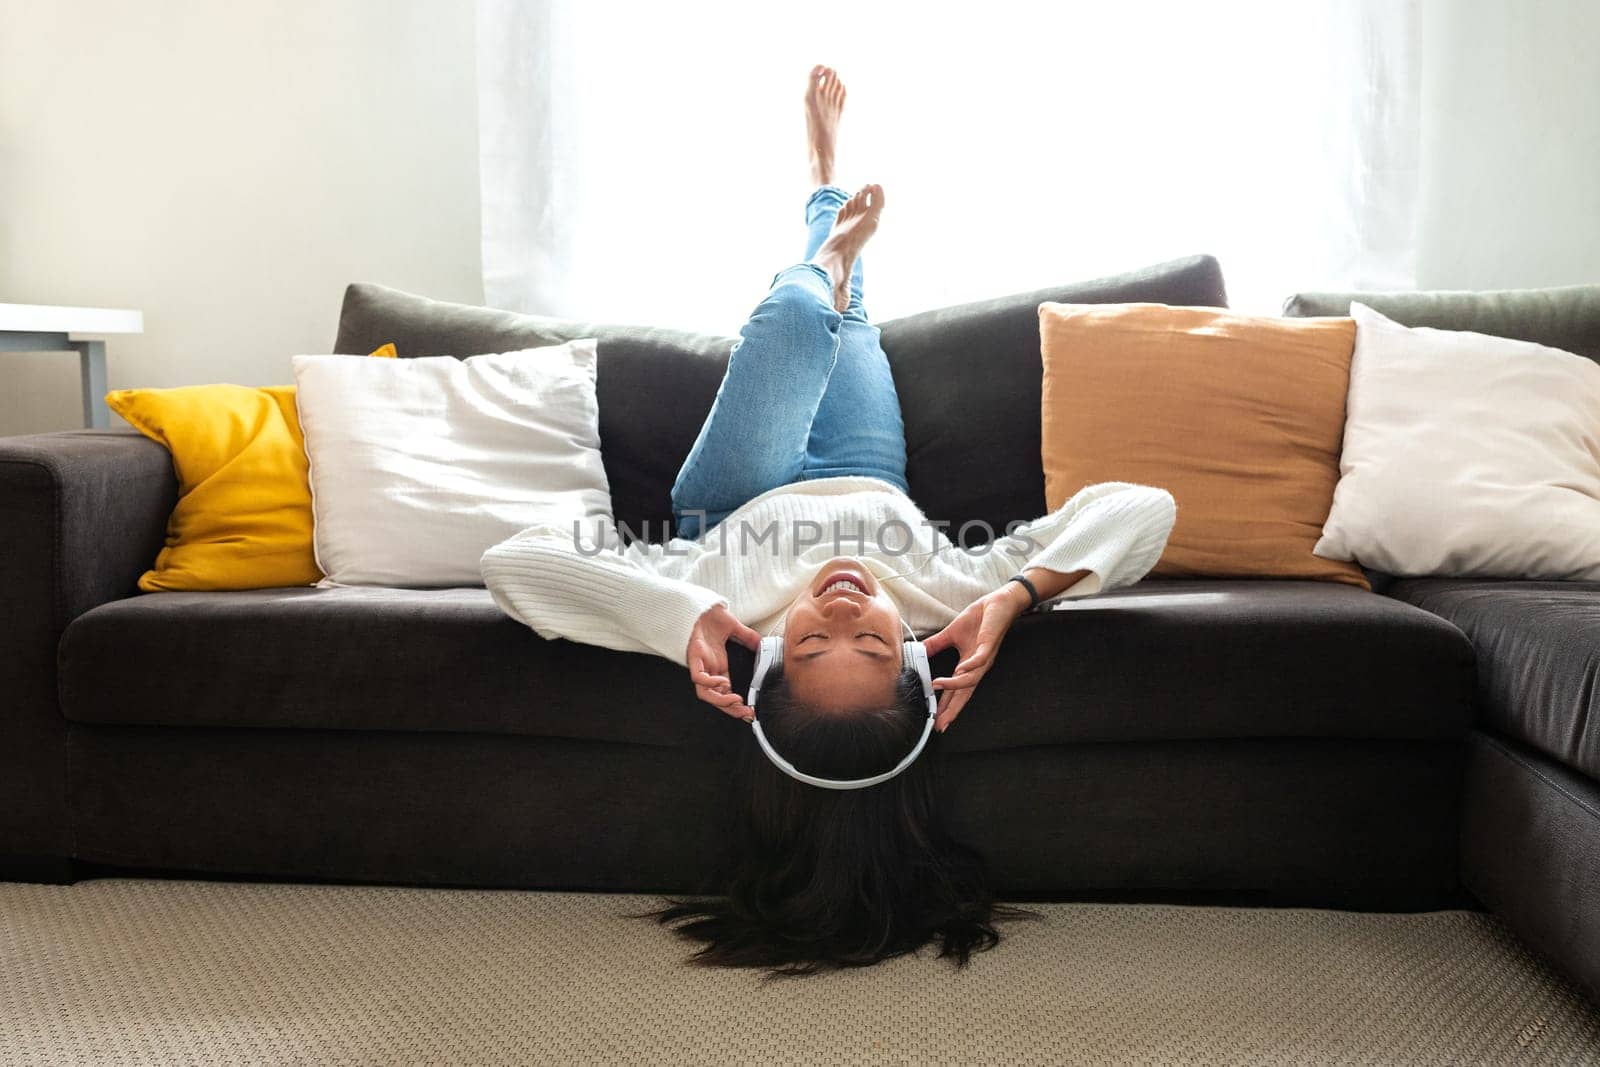 Happy young Asian woman relaxing at home, lying on the couch upside down, listening to music with headphones. Lifestyle concept.